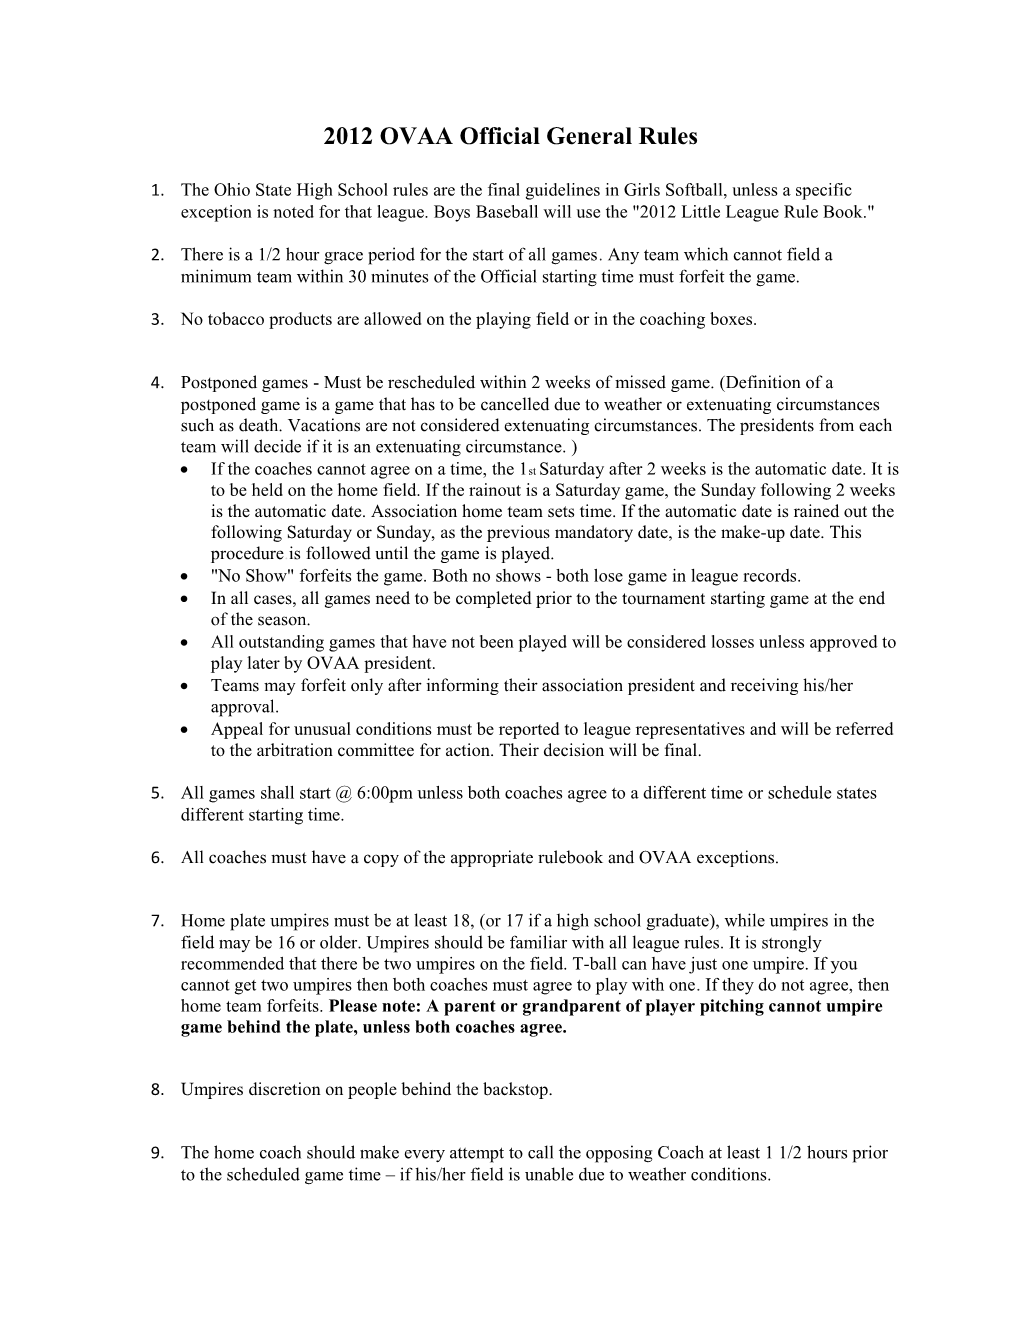 2012 Ovaaofficial General Rules